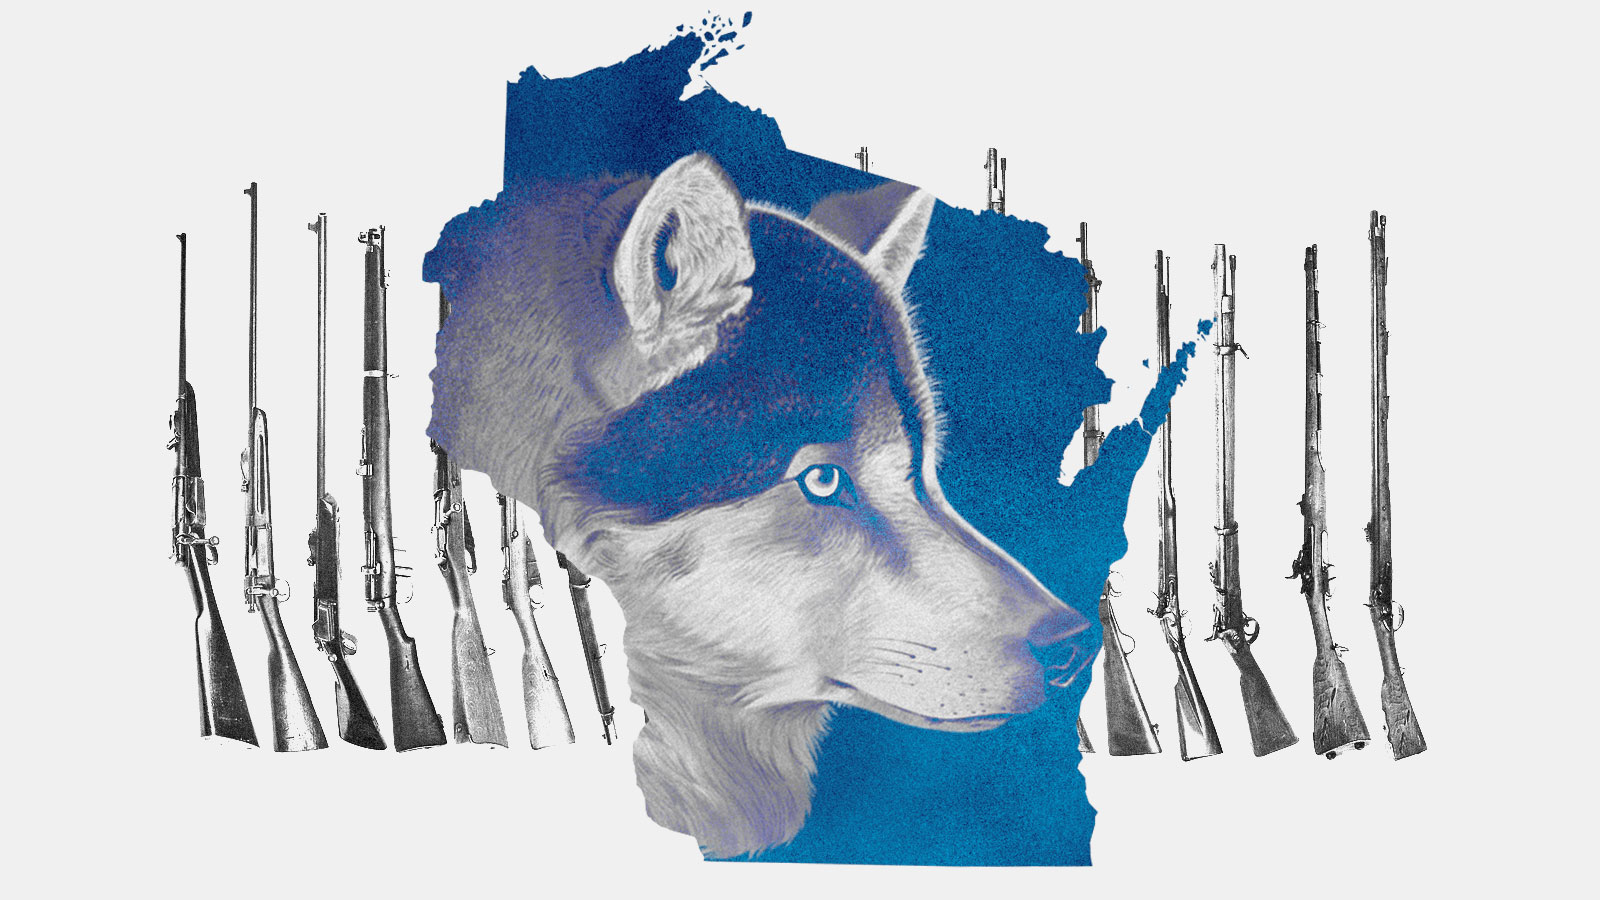 Indigenous nations in Wisconsin suing to prevent wolf hunts | Grist